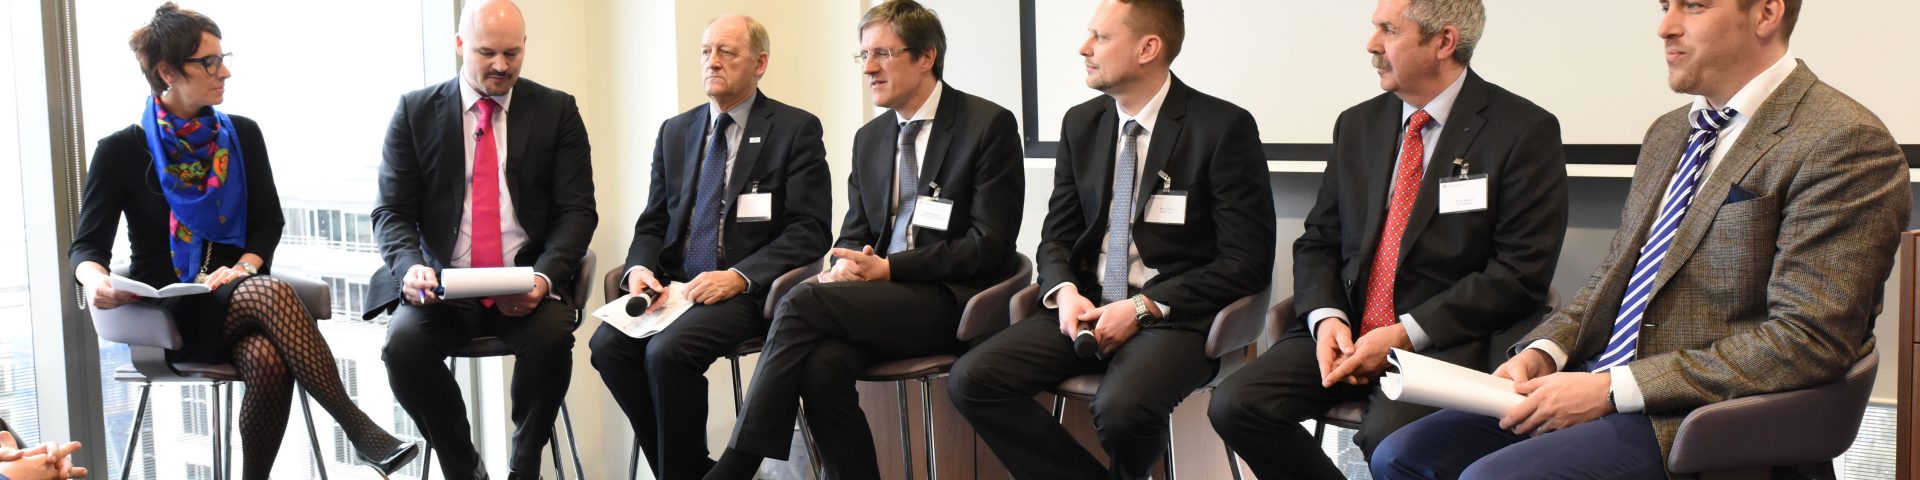 Hear about Automotive opportunity from our Expert panel